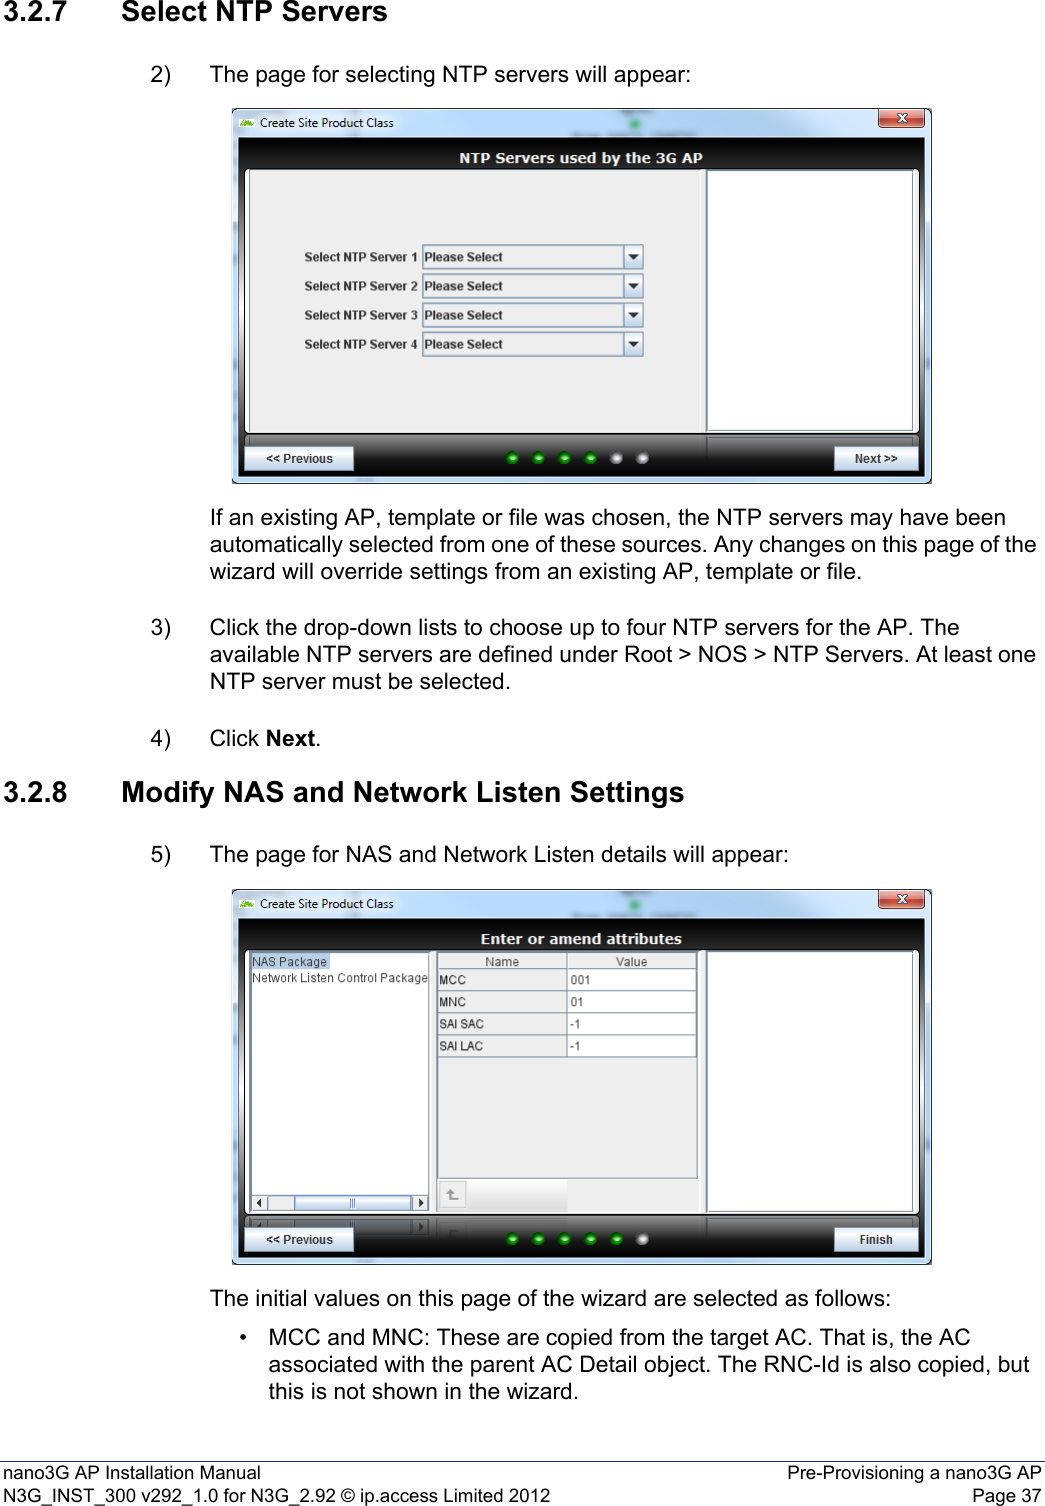 nano3G AP Installation Manual Pre-Provisioning a nano3G APN3G_INST_300 v292_1.0 for N3G_2.92 © ip.access Limited 2012 Page 373.2.7 Select NTP Servers2) The page for selecting NTP servers will appear:If an existing AP, template or file was chosen, the NTP servers may have been automatically selected from one of these sources. Any changes on this page of the wizard will override settings from an existing AP, template or file. 3) Click the drop-down lists to choose up to four NTP servers for the AP. The available NTP servers are defined under Root &gt; NOS &gt; NTP Servers. At least one NTP server must be selected. 4) Click Next. 3.2.8 Modify NAS and Network Listen Settings5) The page for NAS and Network Listen details will appear:The initial values on this page of the wizard are selected as follows:• MCC and MNC: These are copied from the target AC. That is, the AC associated with the parent AC Detail object. The RNC-Id is also copied, but this is not shown in the wizard. 